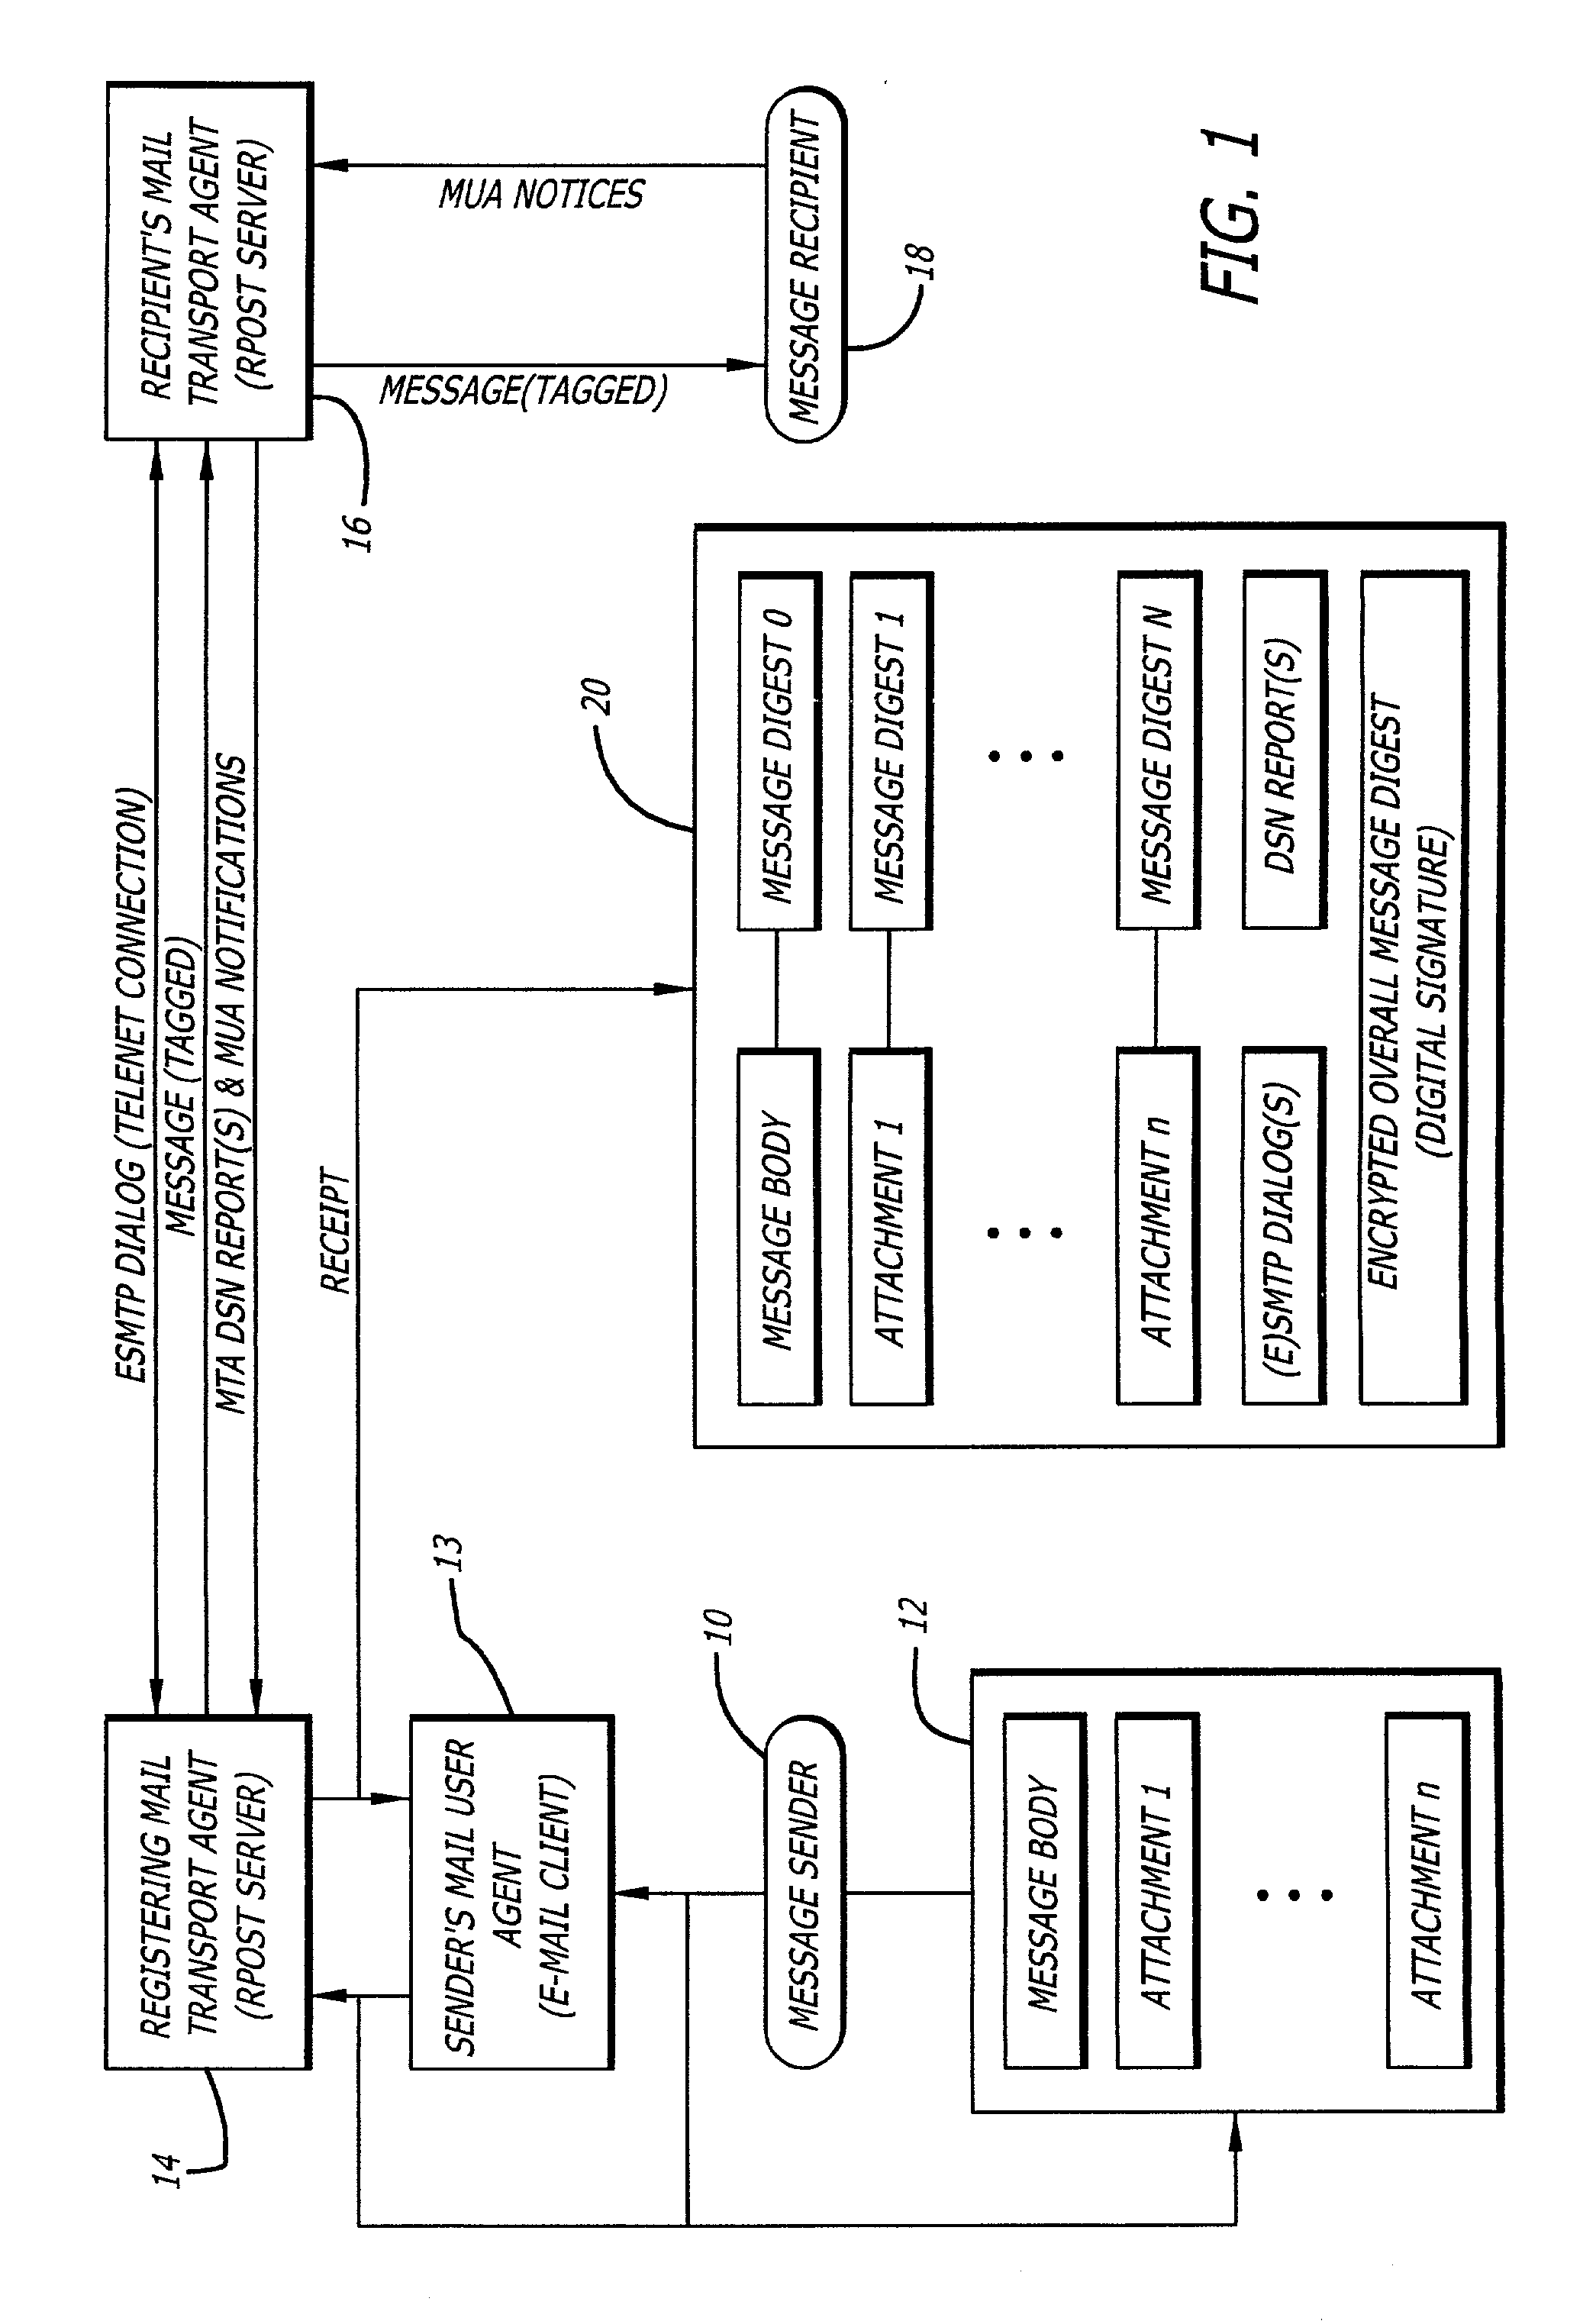 System and method for verifying delivery and integrity of electronic messages